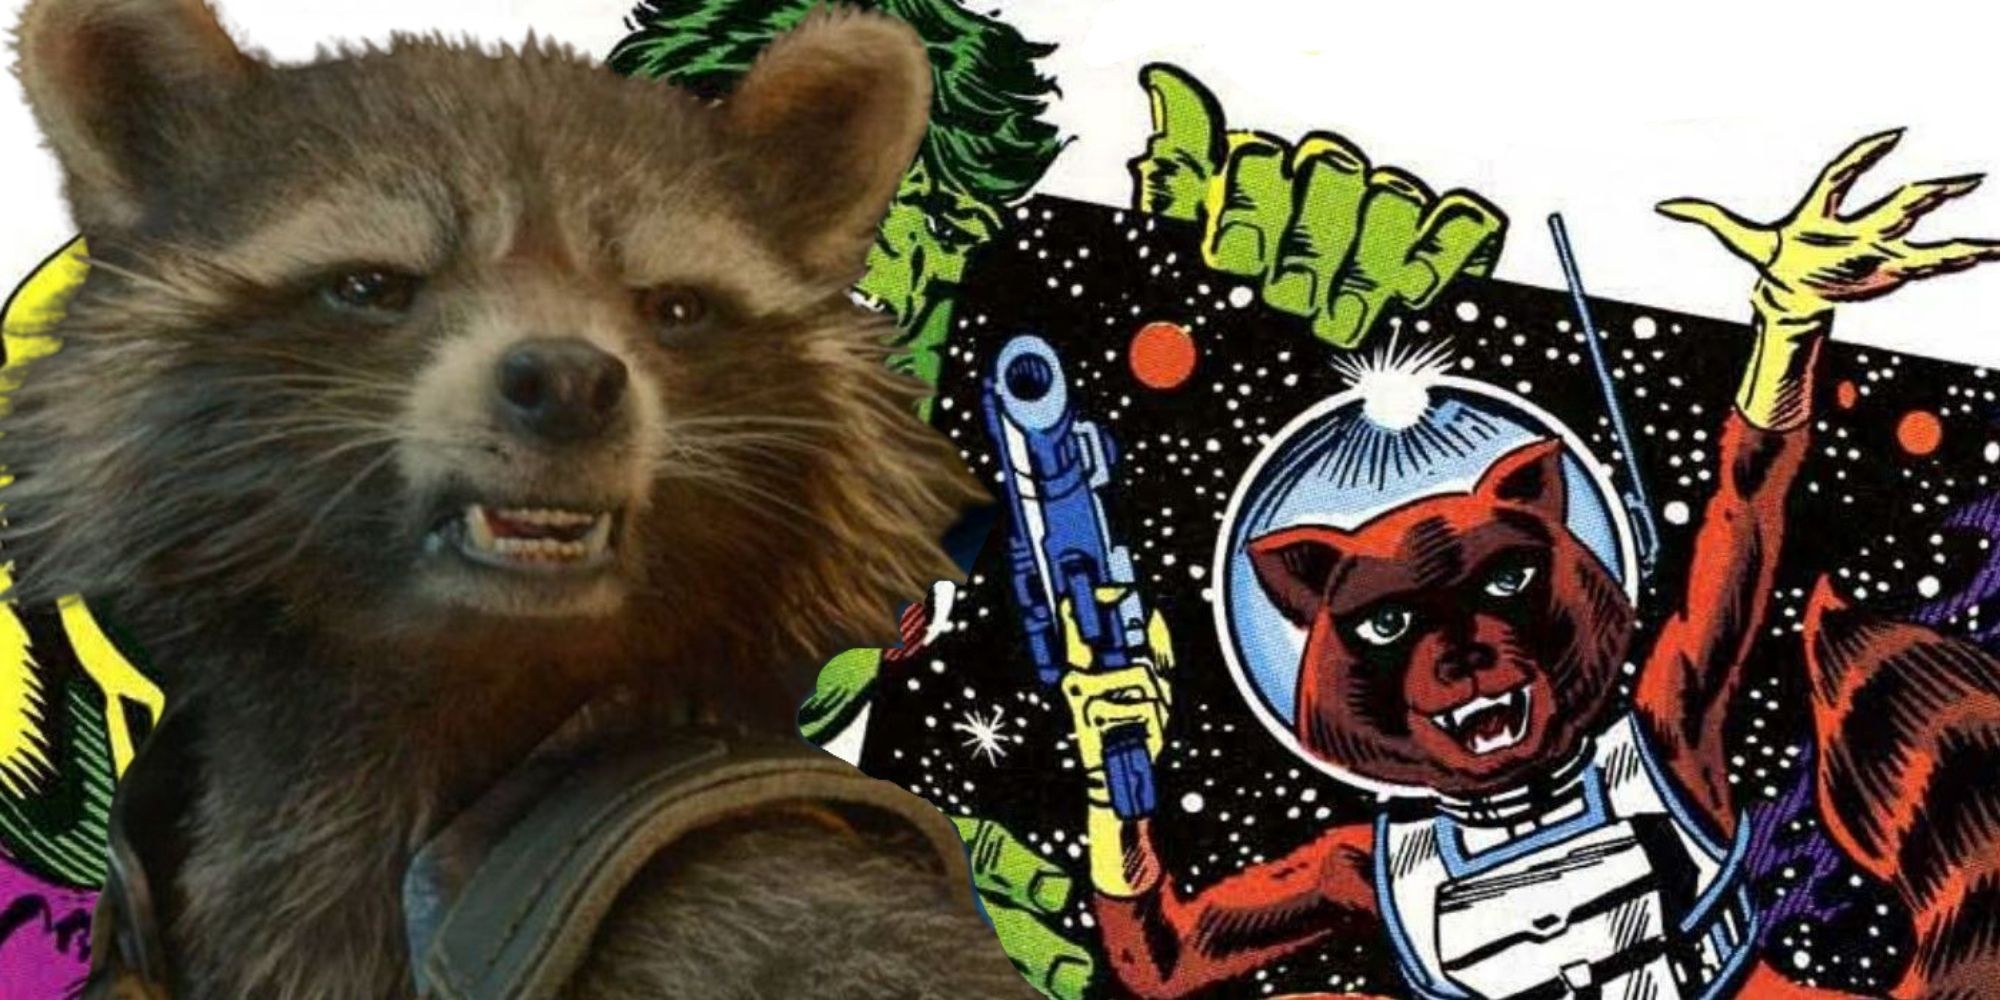 A combined image of Rocket Raccoon in the MCU and in Marvel Comics with The Hulk